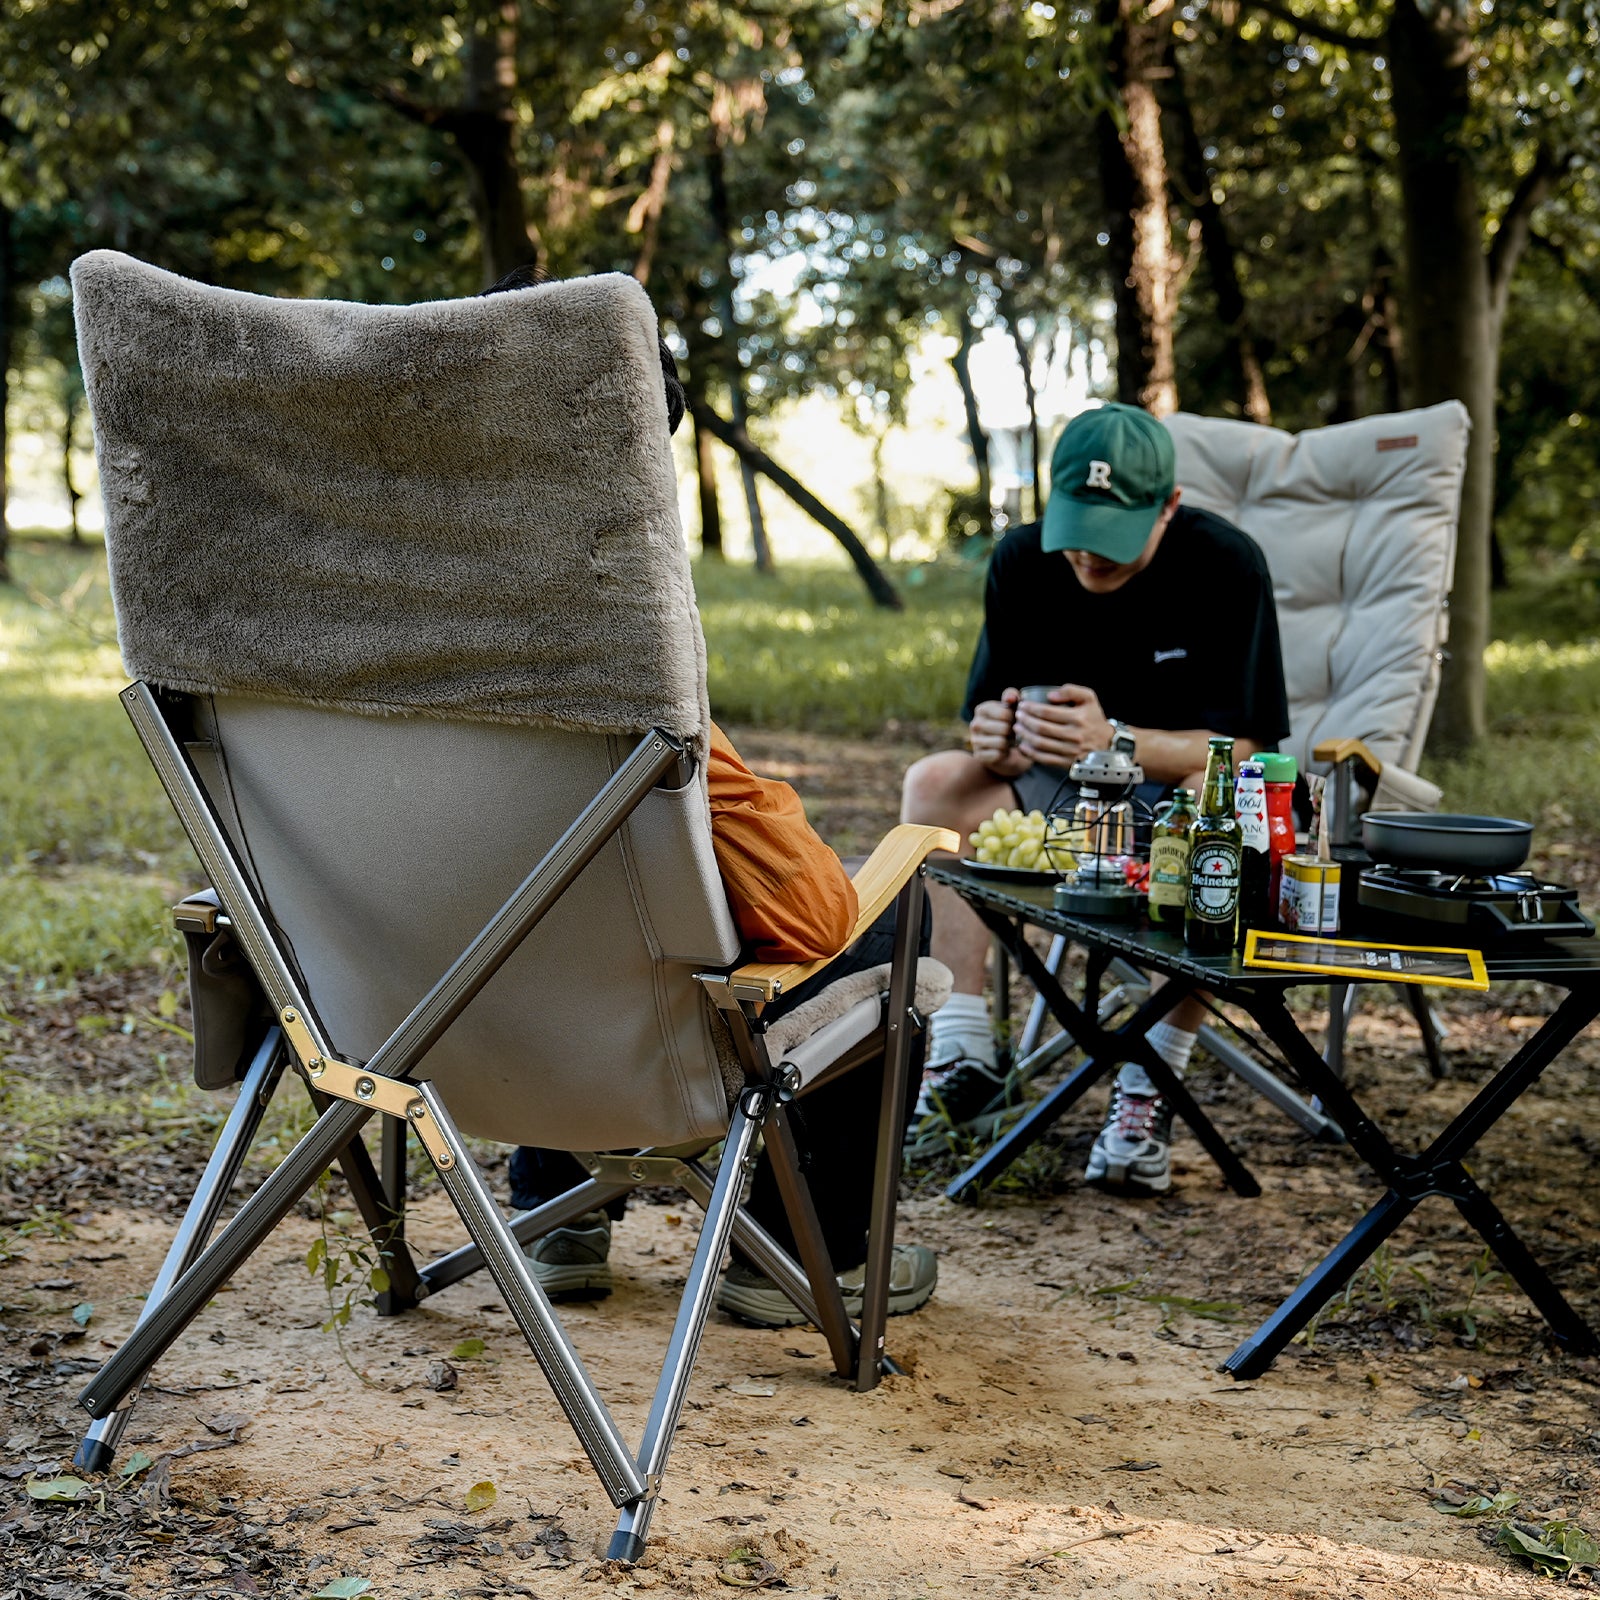 New！Plush Cushion for High-back Camping Chair | ICECO-Outdoor Gear-www.icecofreezer.com